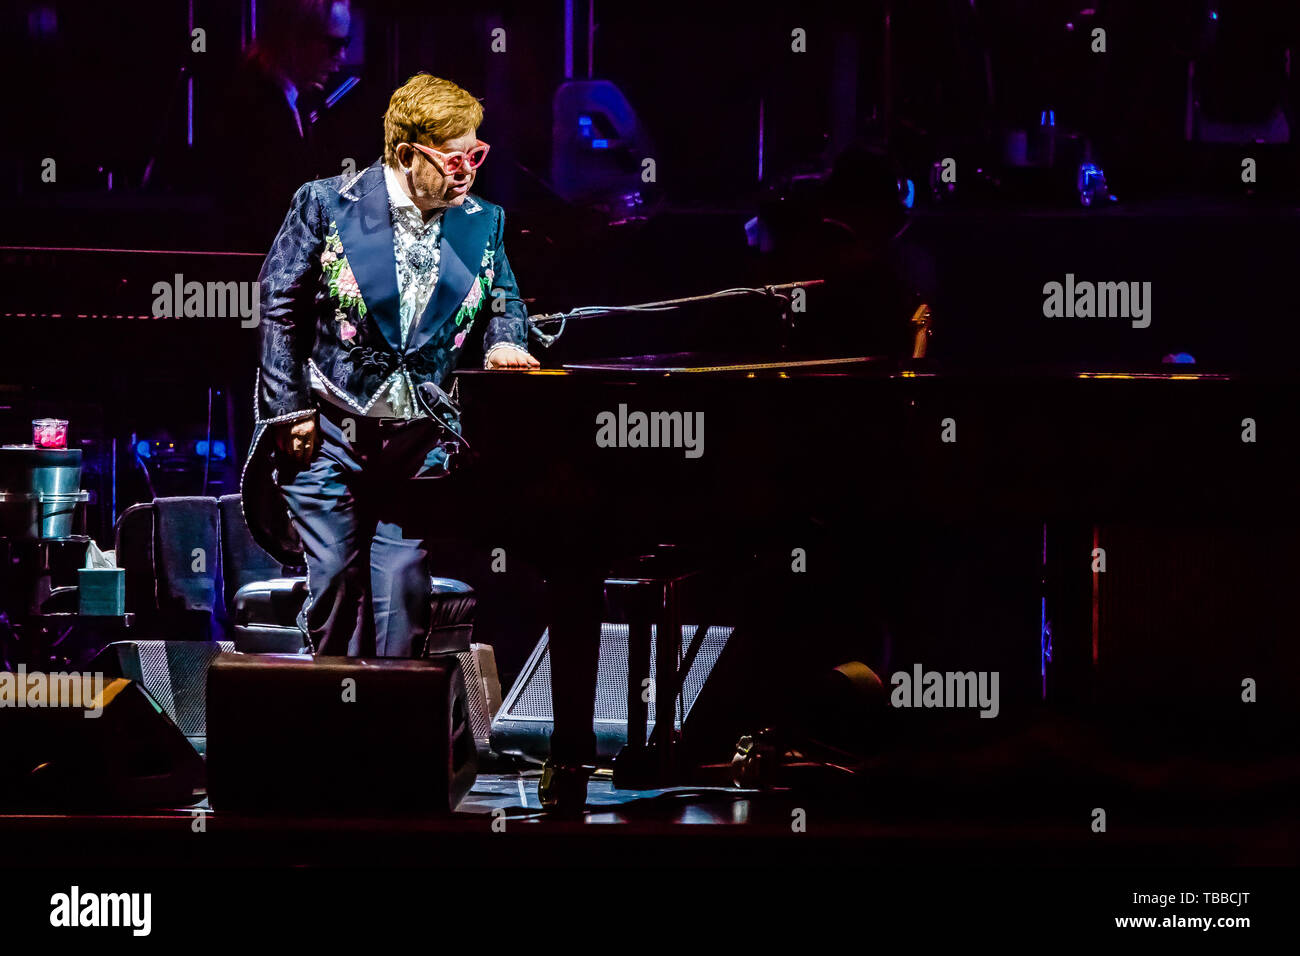 Verona, Italy. 29th May, 2019. Elton John, living legend of world pop  music, has performed for the first date of the Arena di Verona and of the  three dates scheduled in Italy (